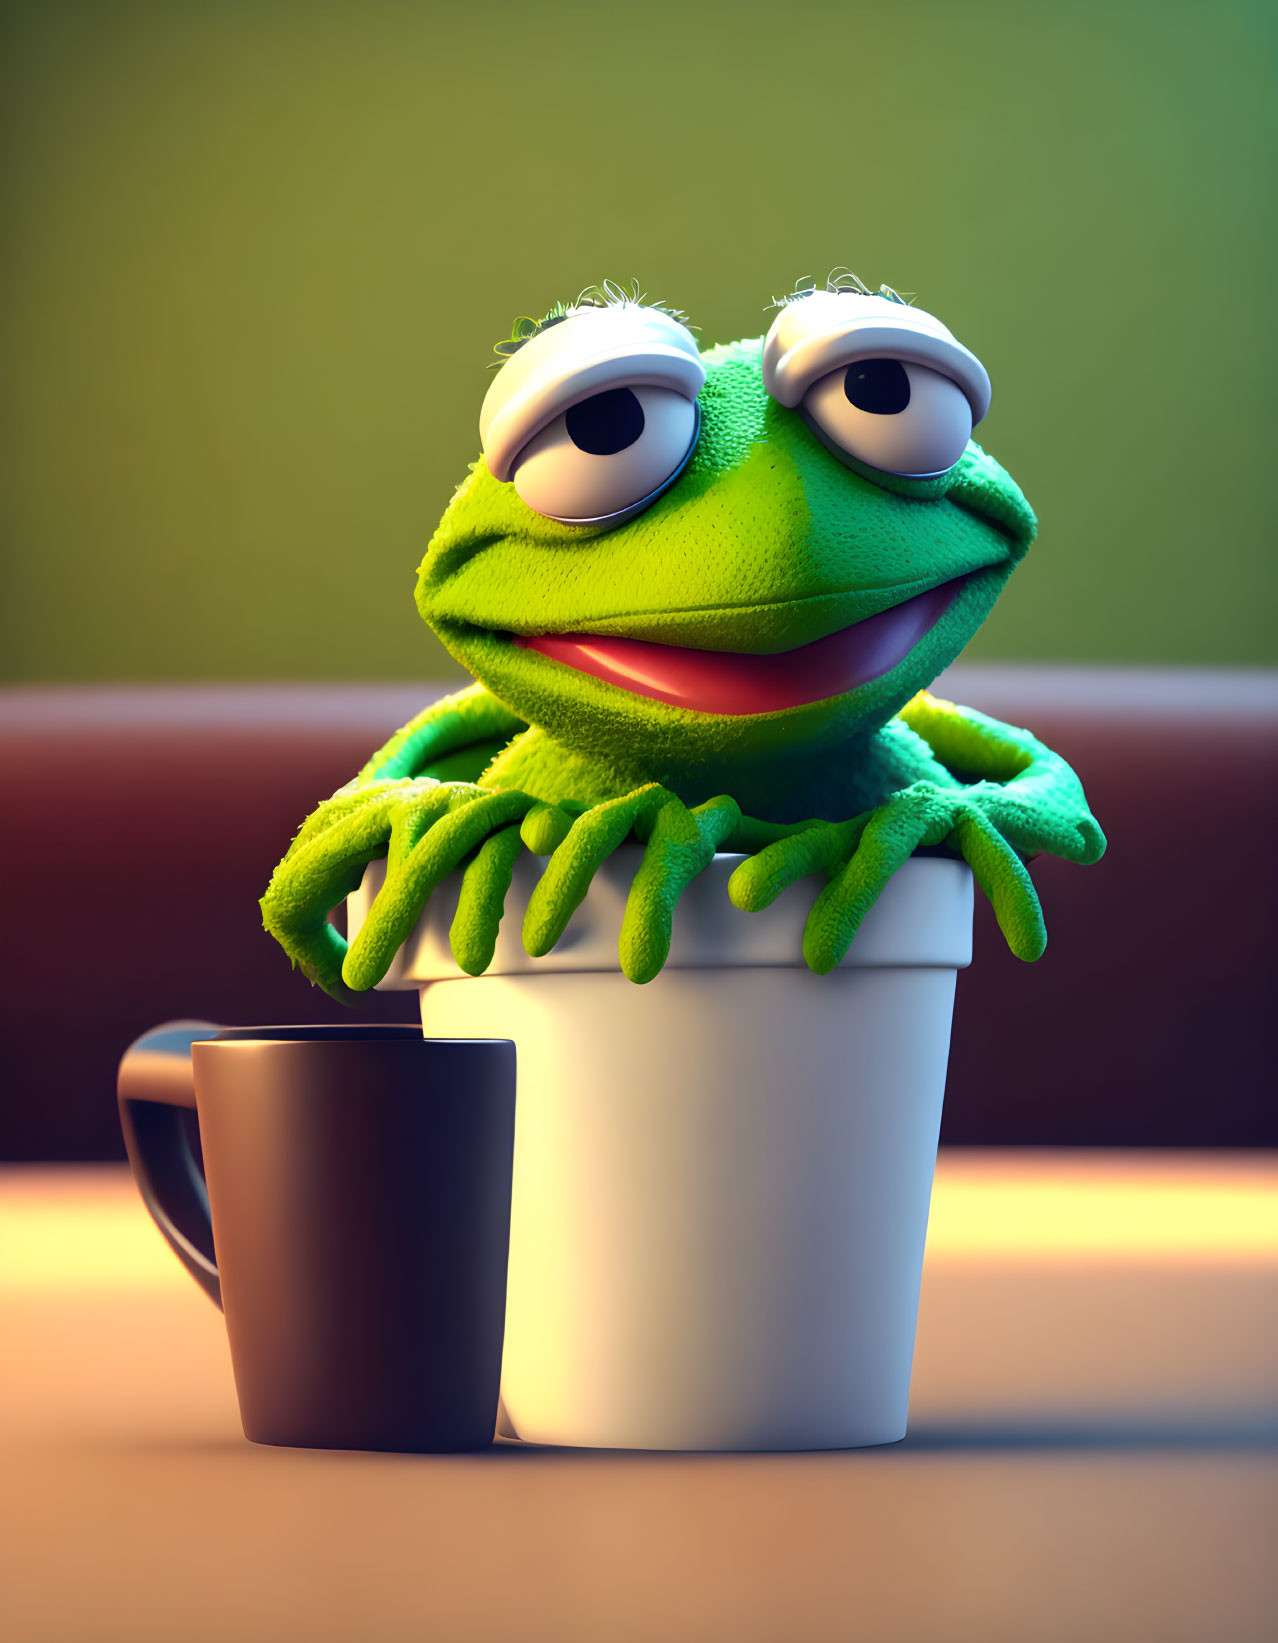 Smiling green frog character on white cup and dark mug table